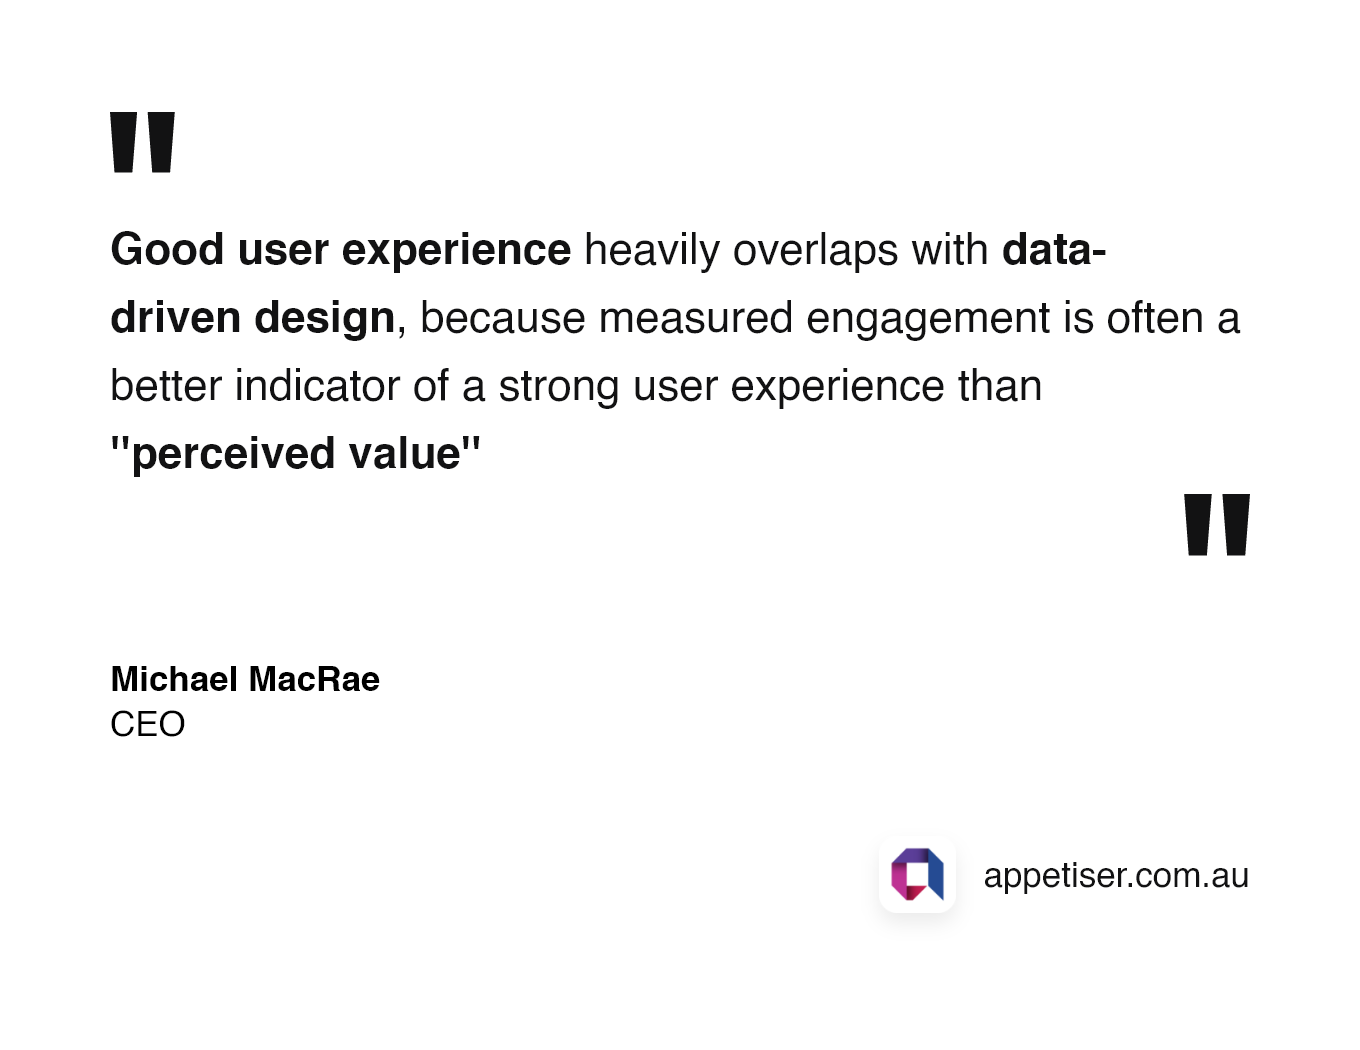 HAMAD: Michael MacRae quote about good UX